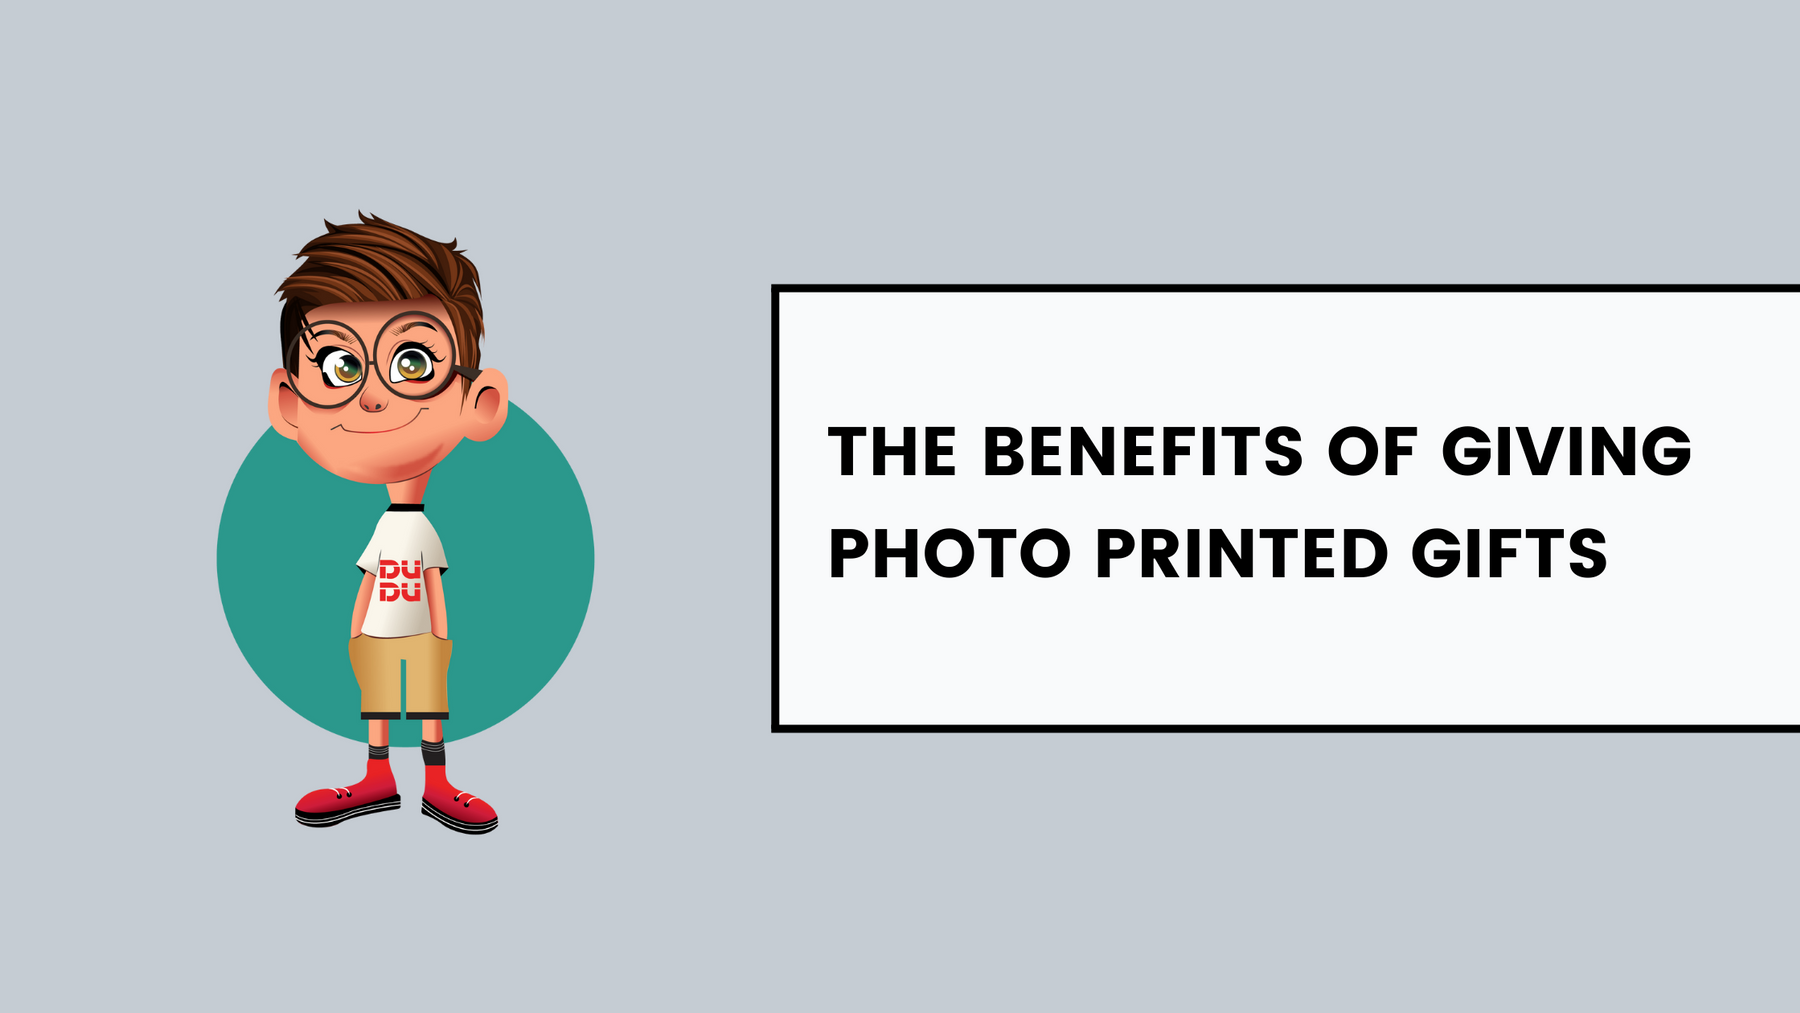 The Benefits of Giving Photo Printed Gifts